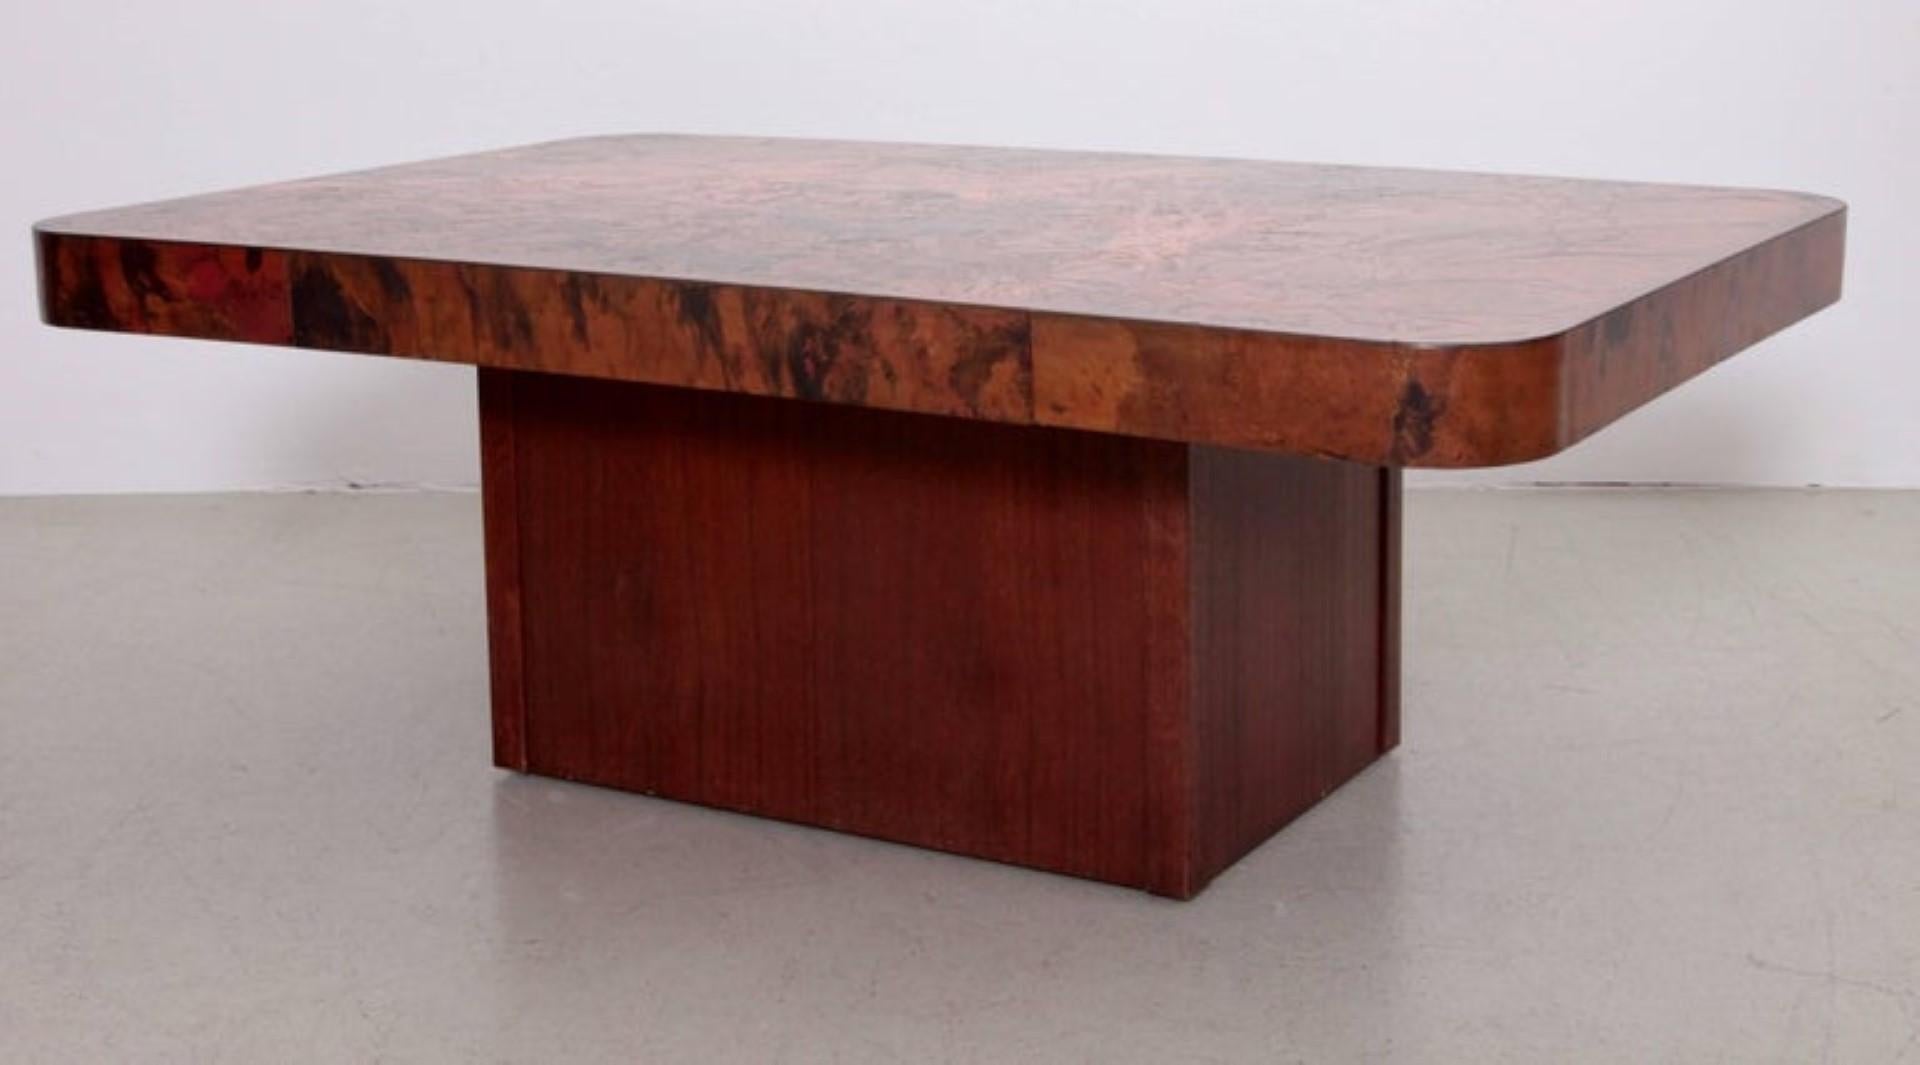 Huge coffee table with copper tabletop and mahogany base by Bernard Rohne. The table is from the 1960s and in a very good condition.